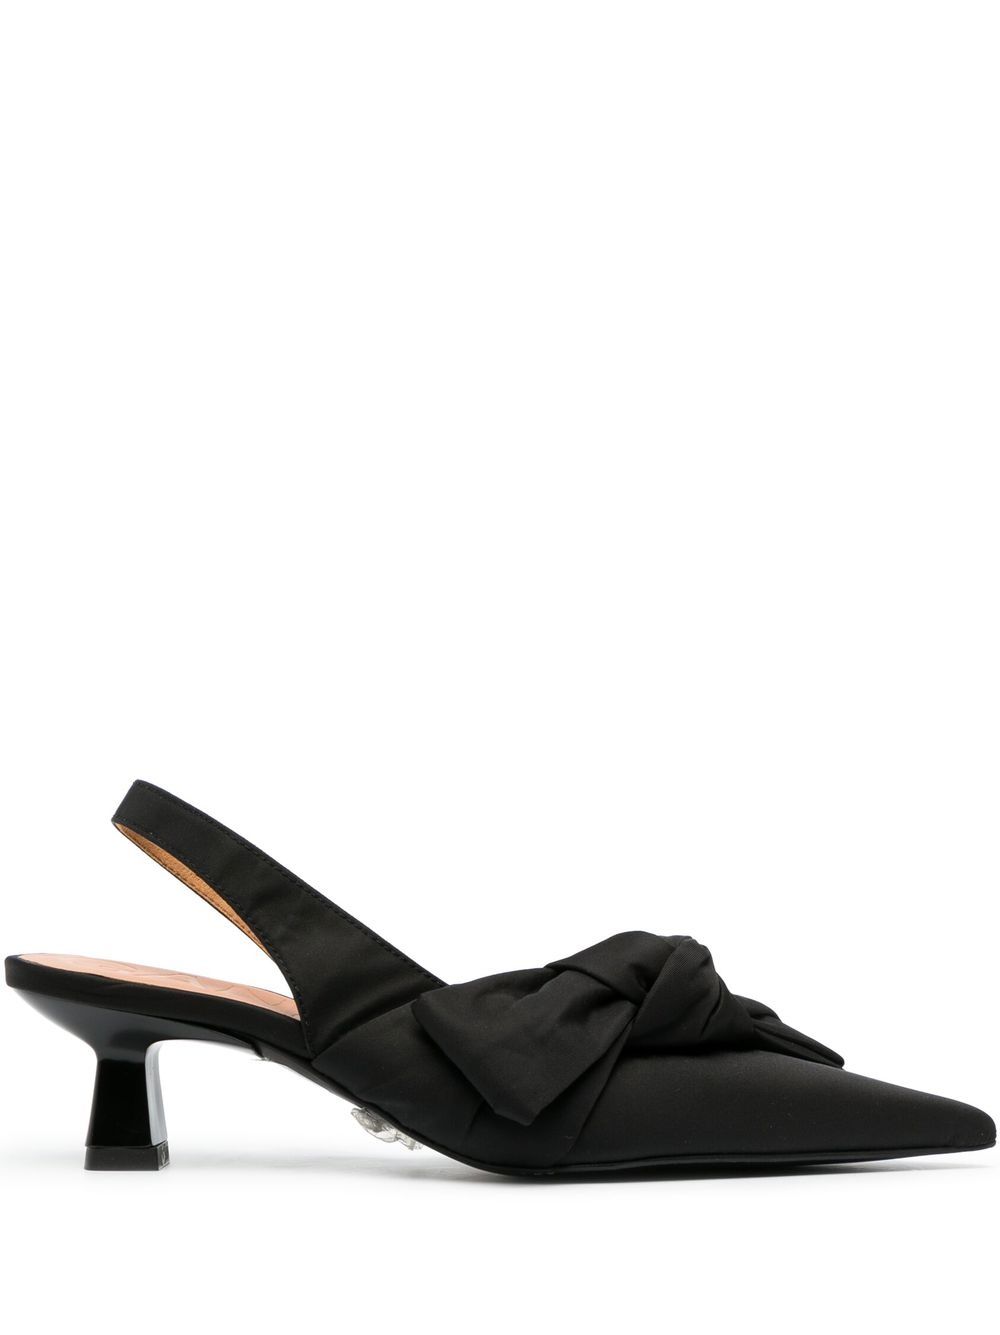 GANNI BOW-DETAIL POINTED PUMPS